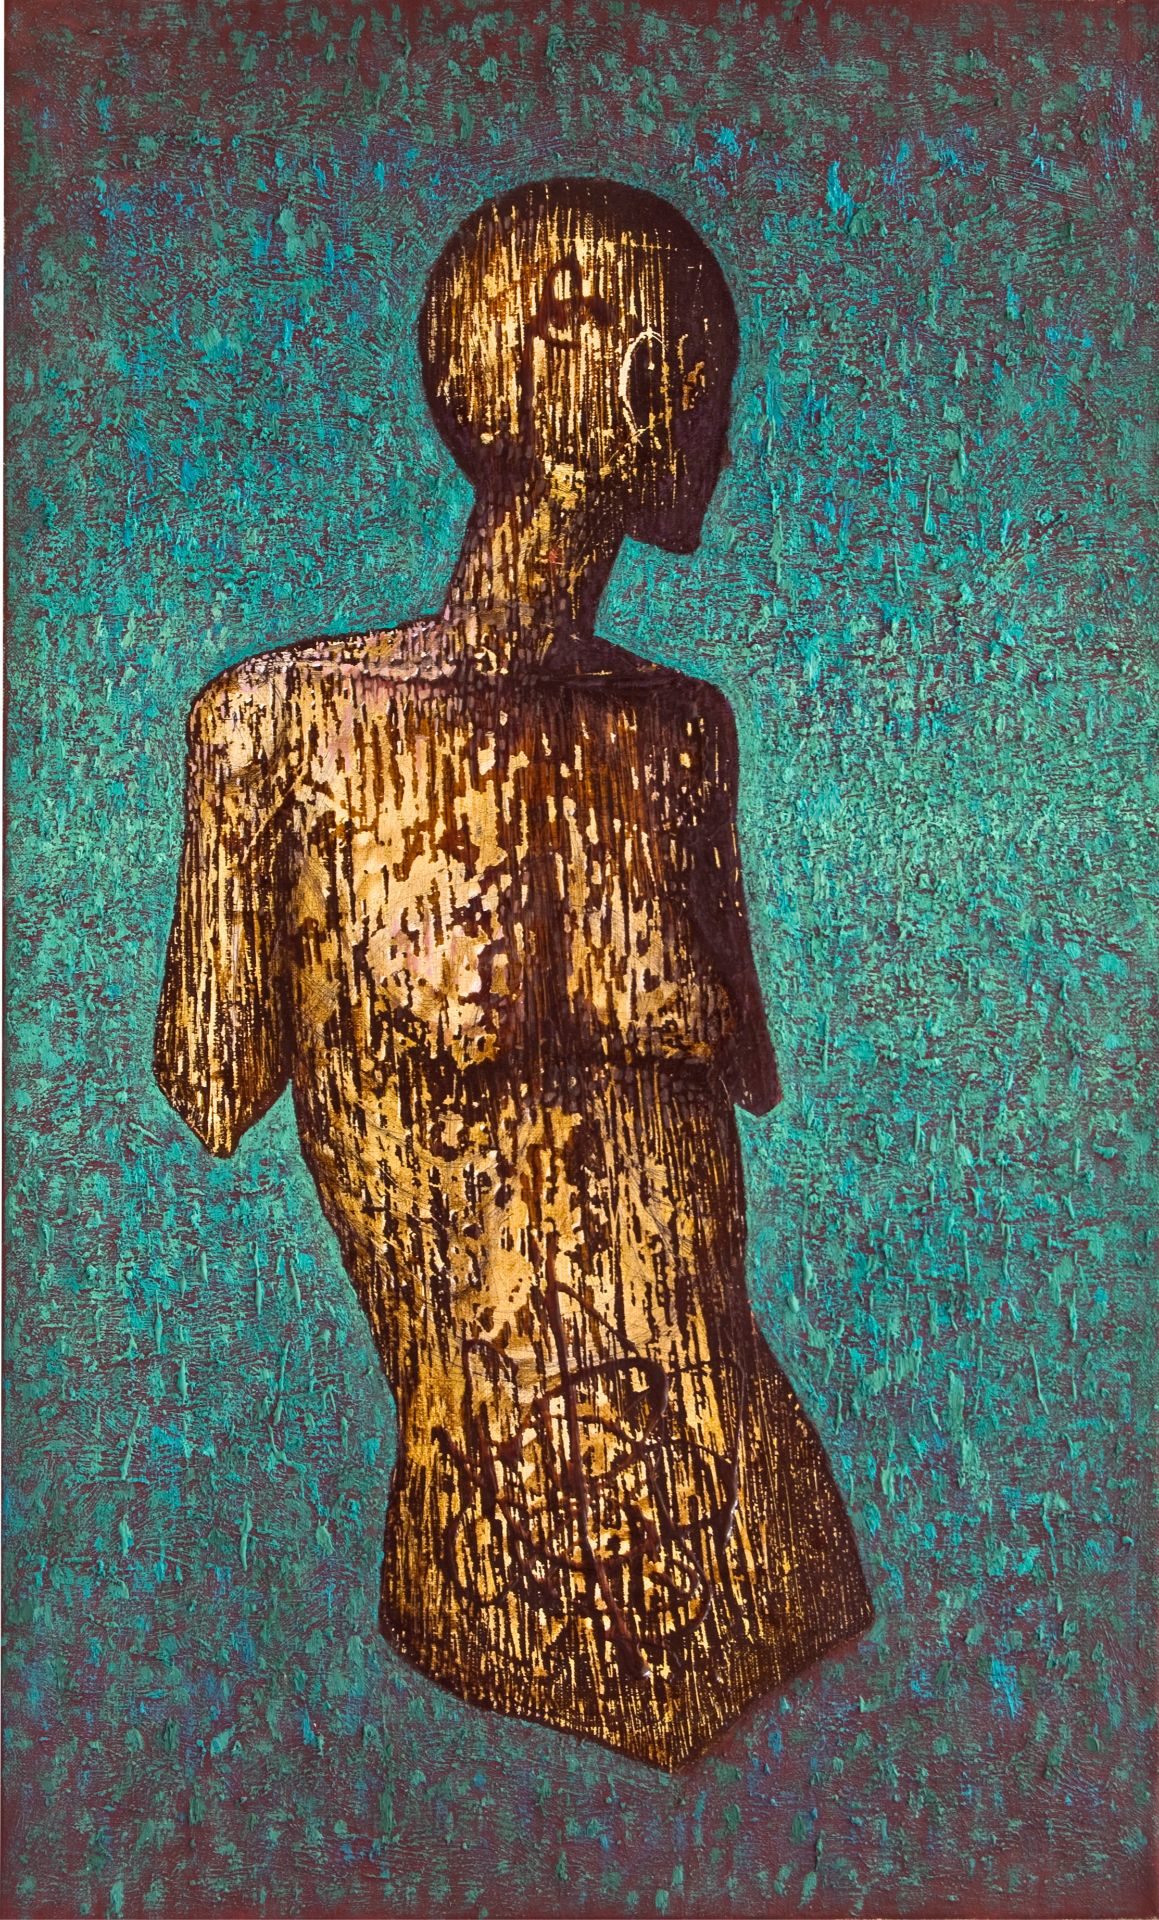 Statue of a woman 100x60cm, oil, shellac resin on canvas 2013